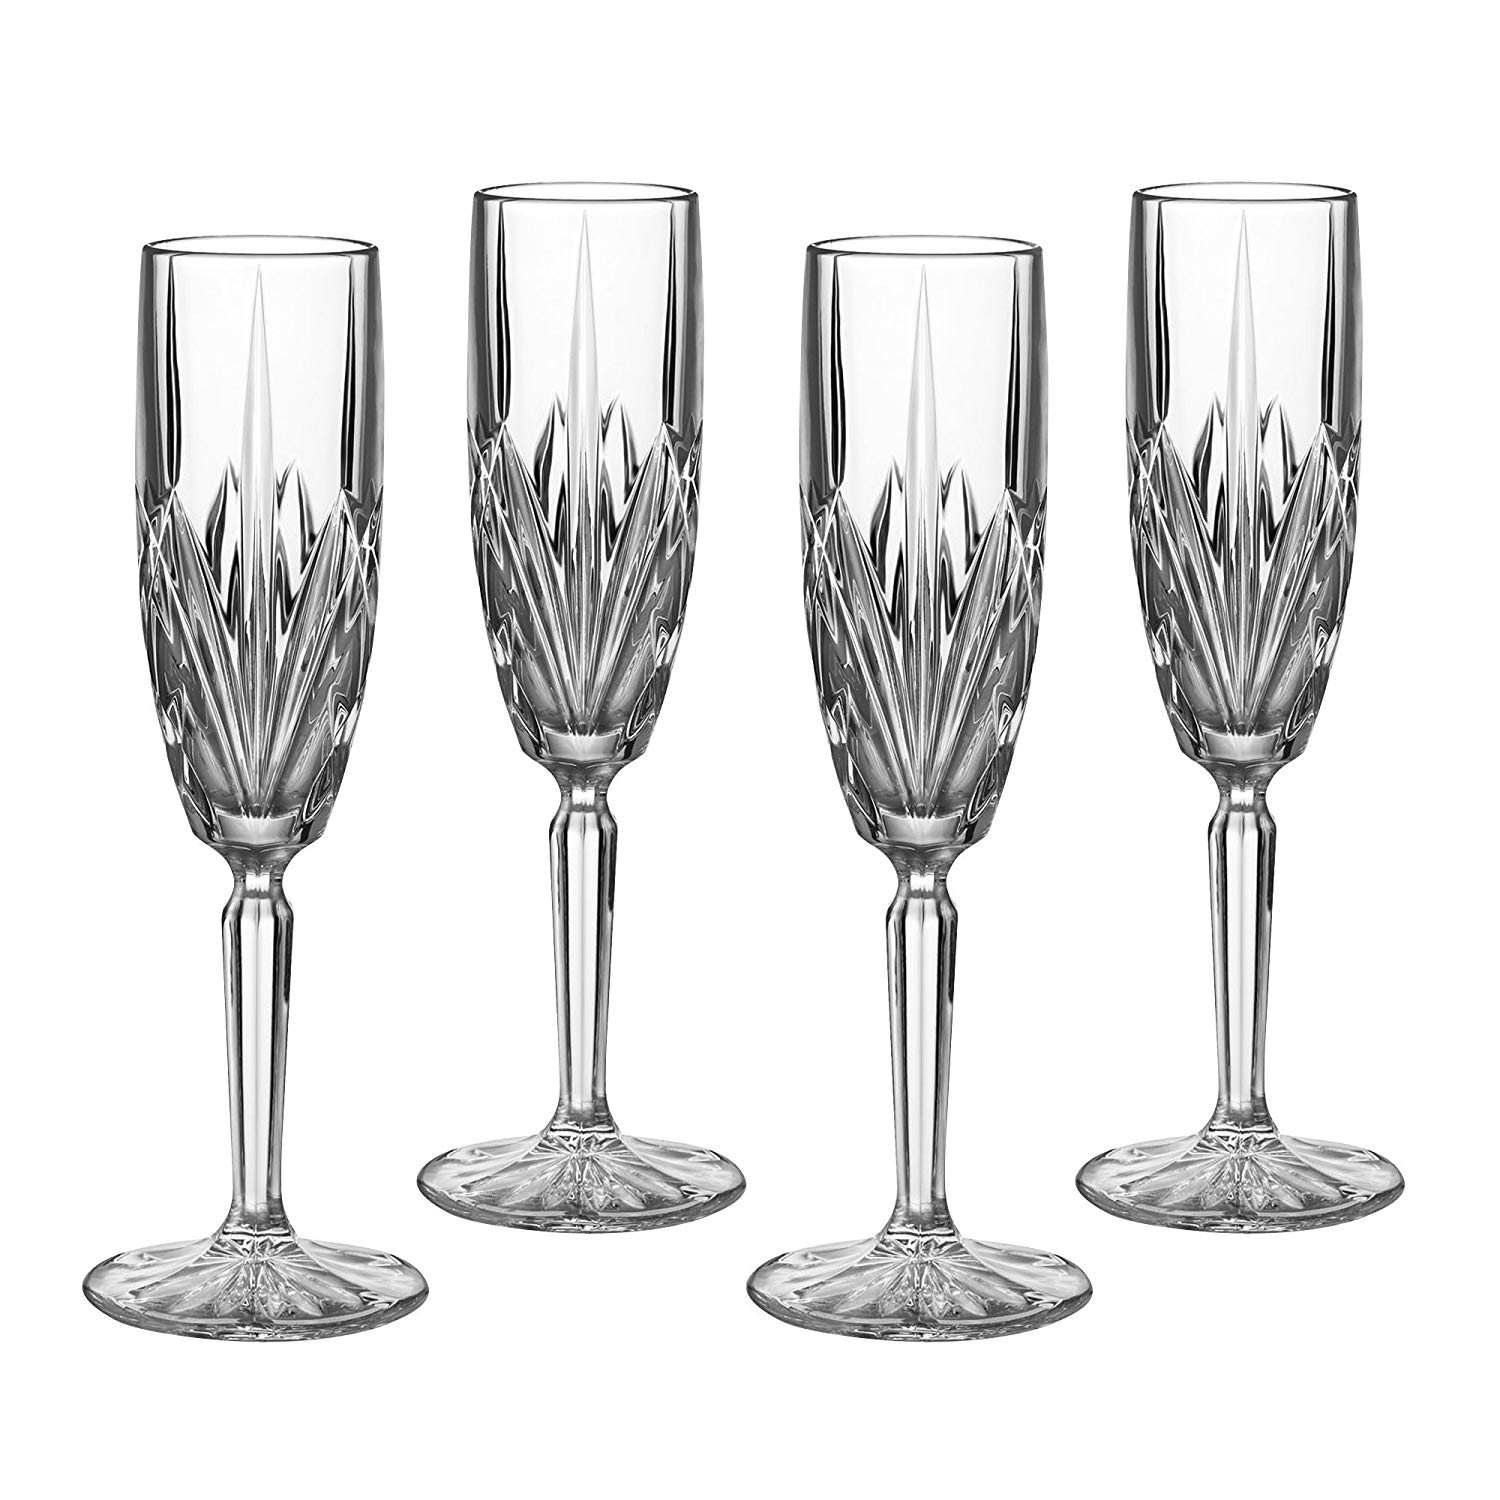 15 Stunning Marquis by Waterford 9 Inch Vase 2024 free download marquis by waterford 9 inch vase of amazon com marquis by waterford brookside 6 ounce champagne flutes inside amazon com marquis by waterford brookside 6 ounce champagne flutes set of 4 wine